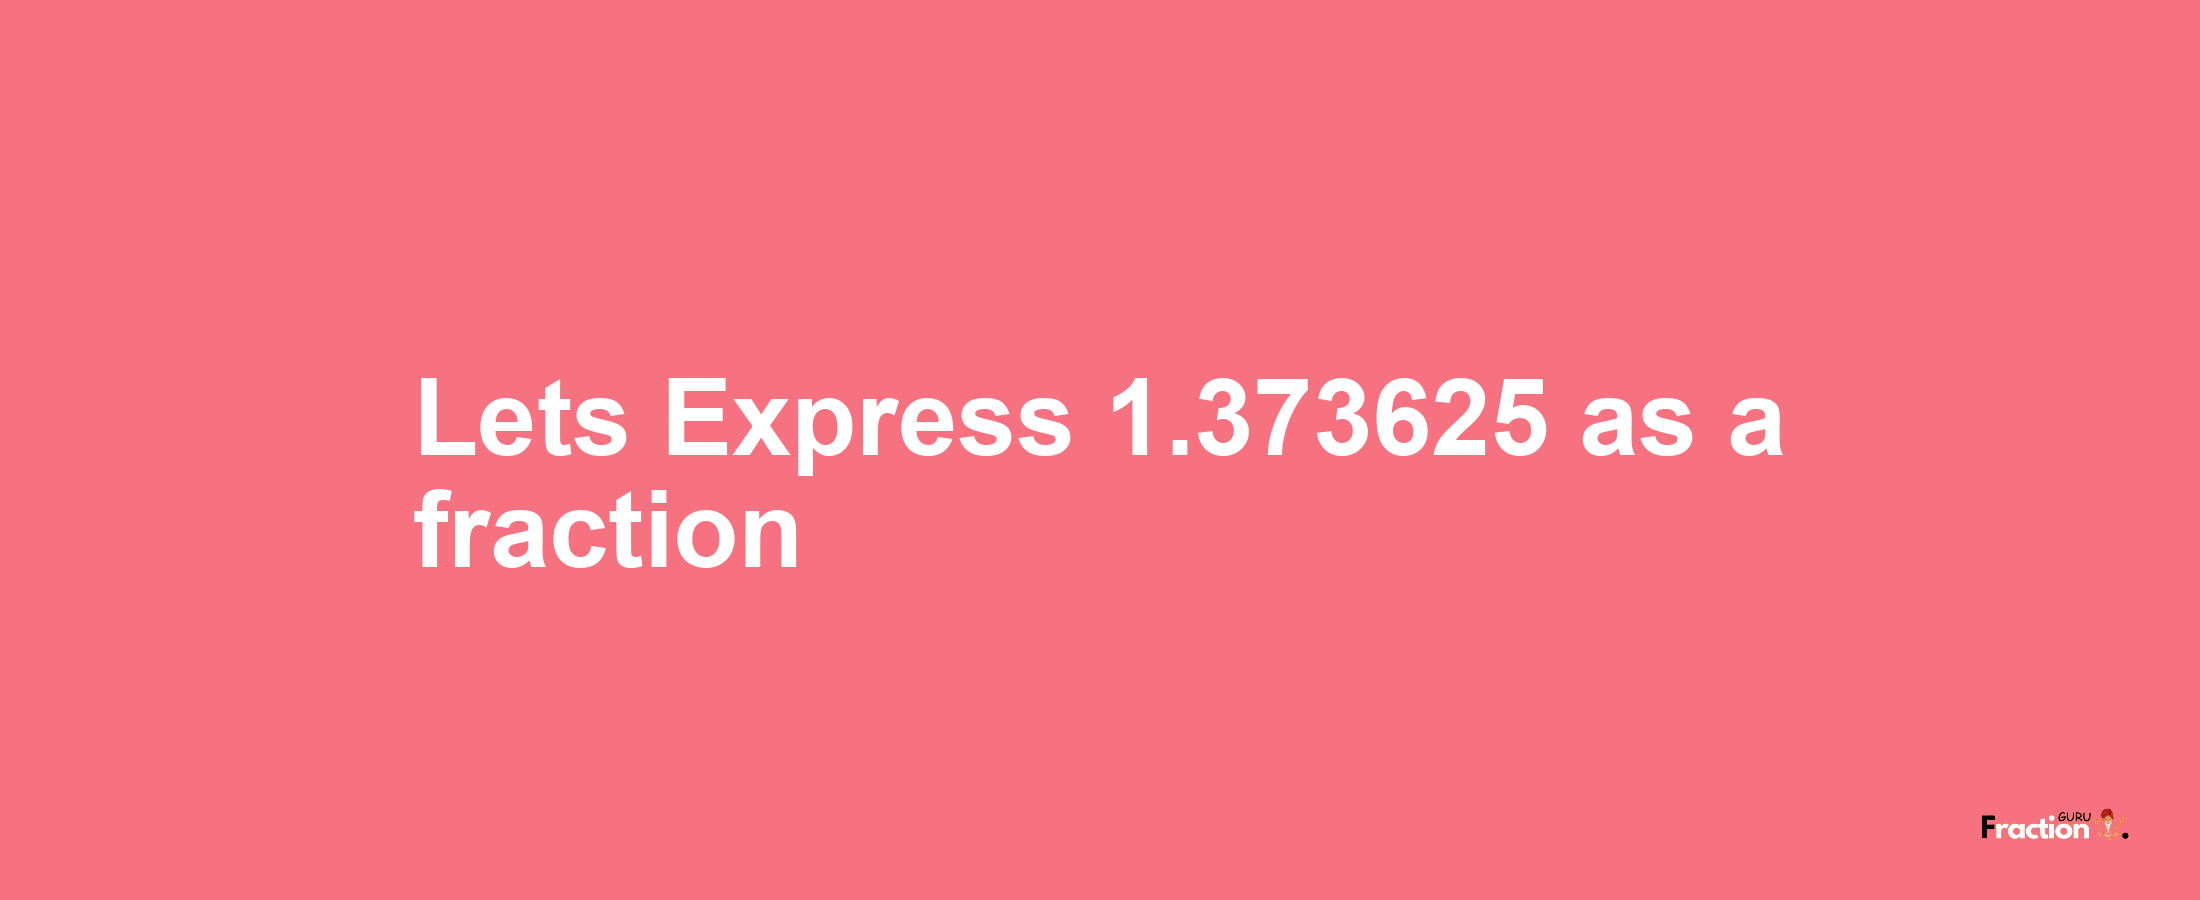 Lets Express 1.373625 as afraction